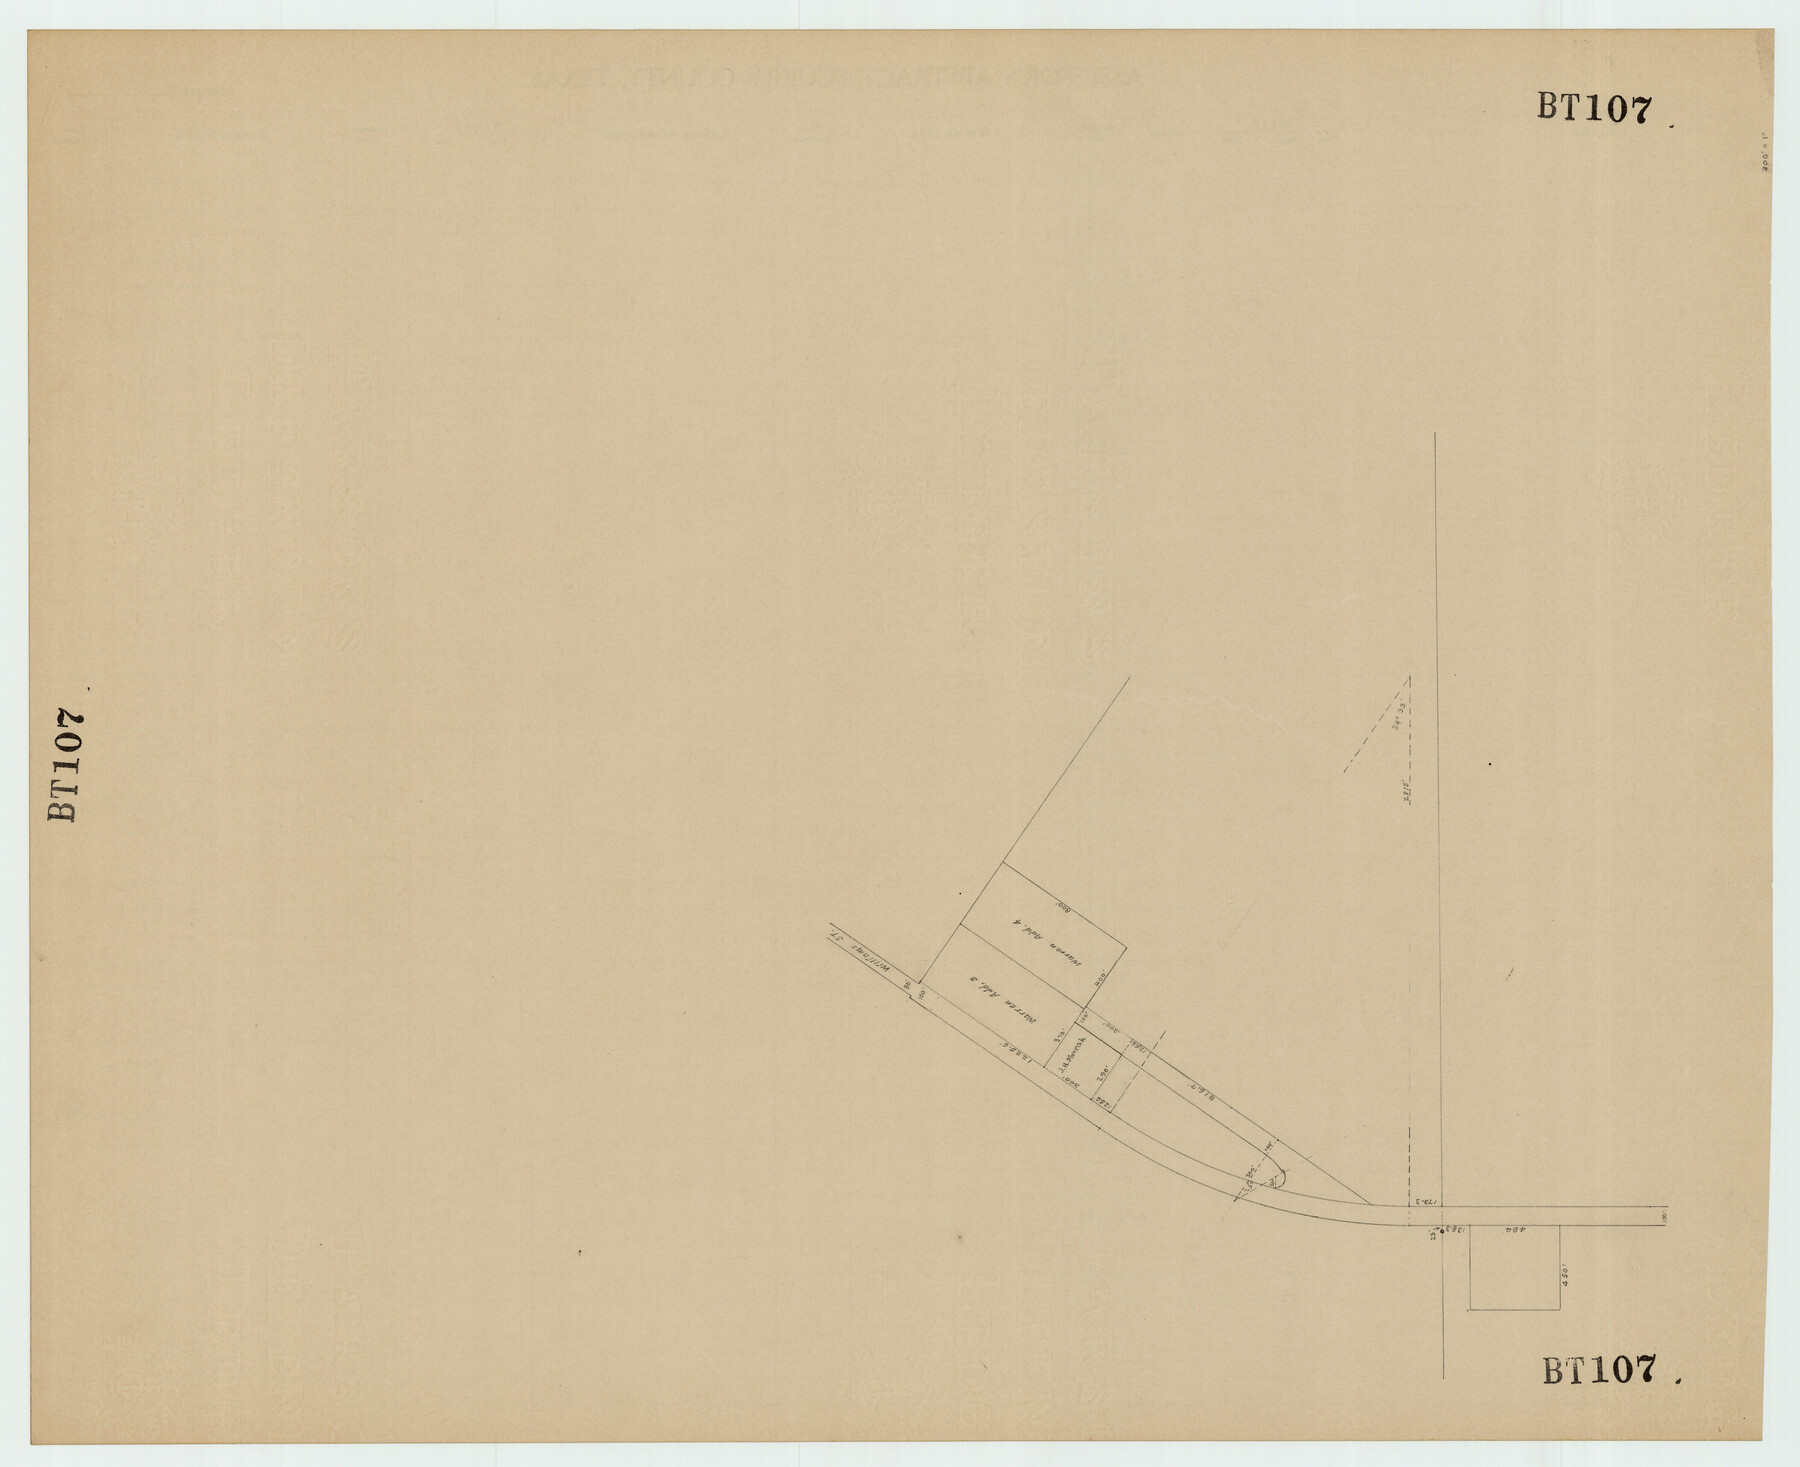 92464, [Warren Additions 3 and 4 and vicinity], Twichell Survey Records